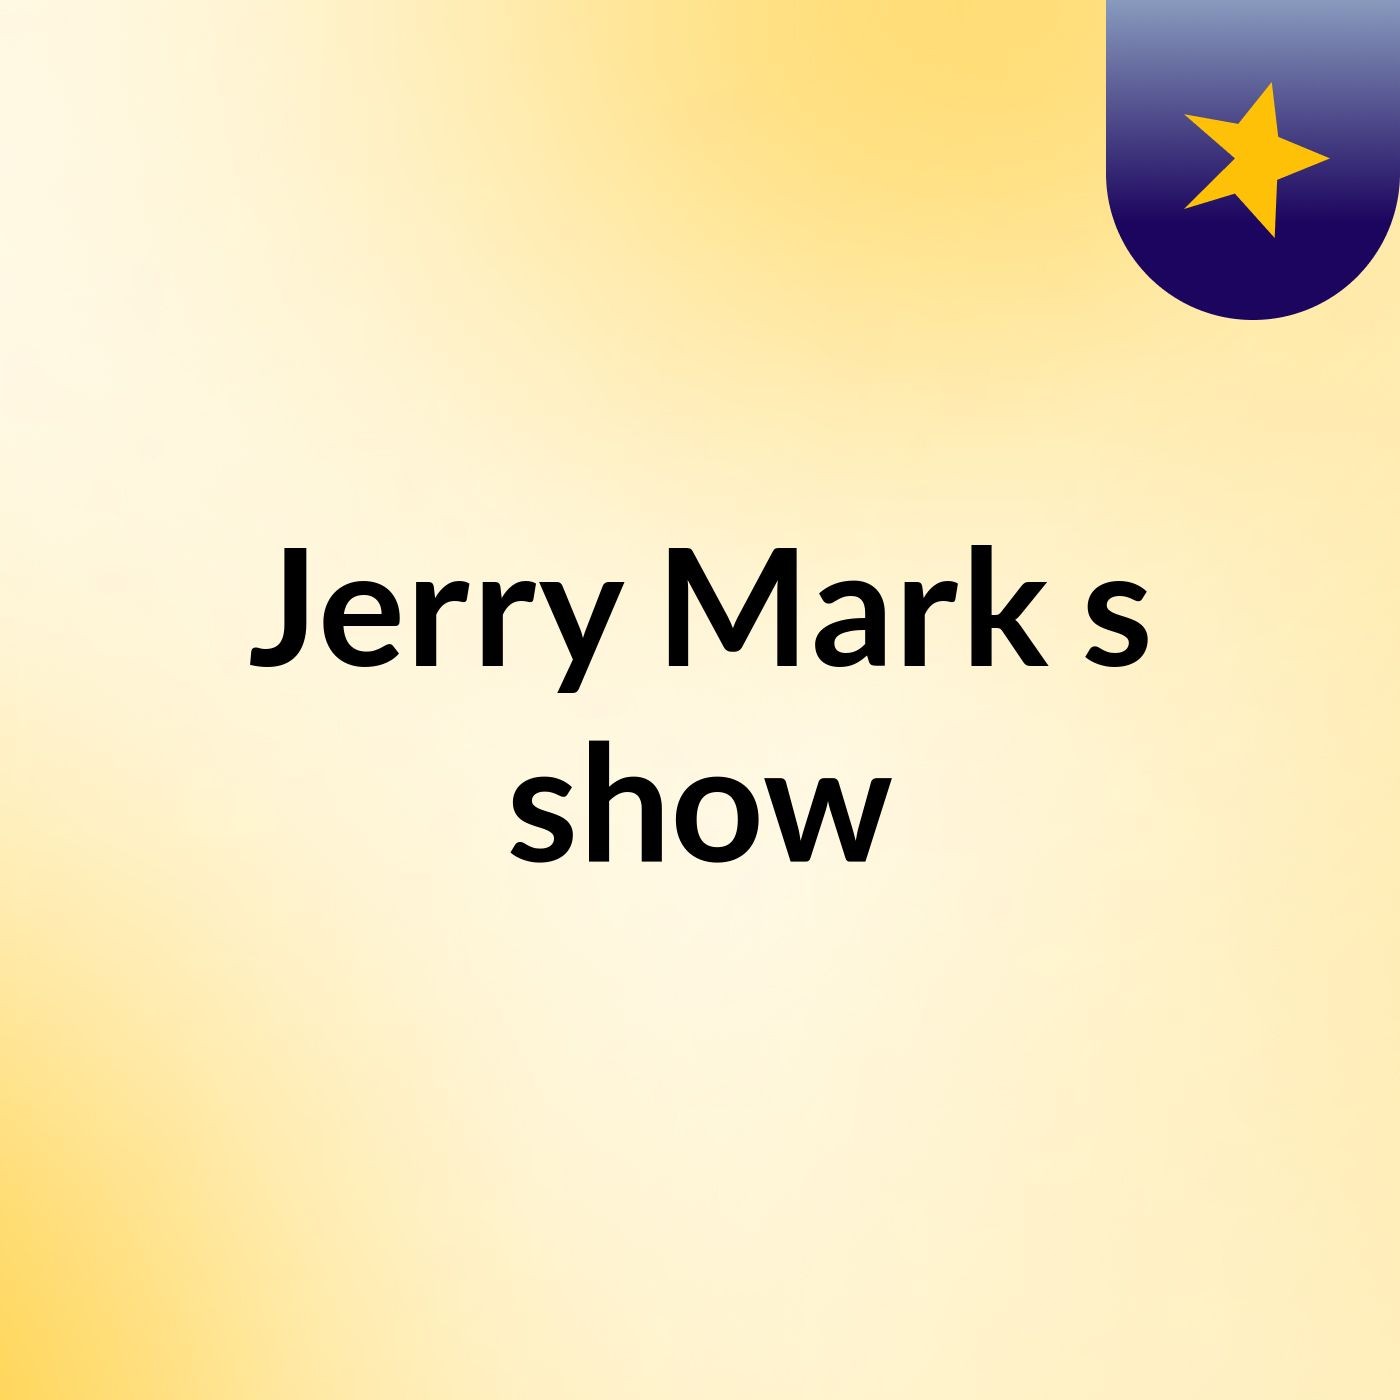 Episode 2 - Jerry Mark's show